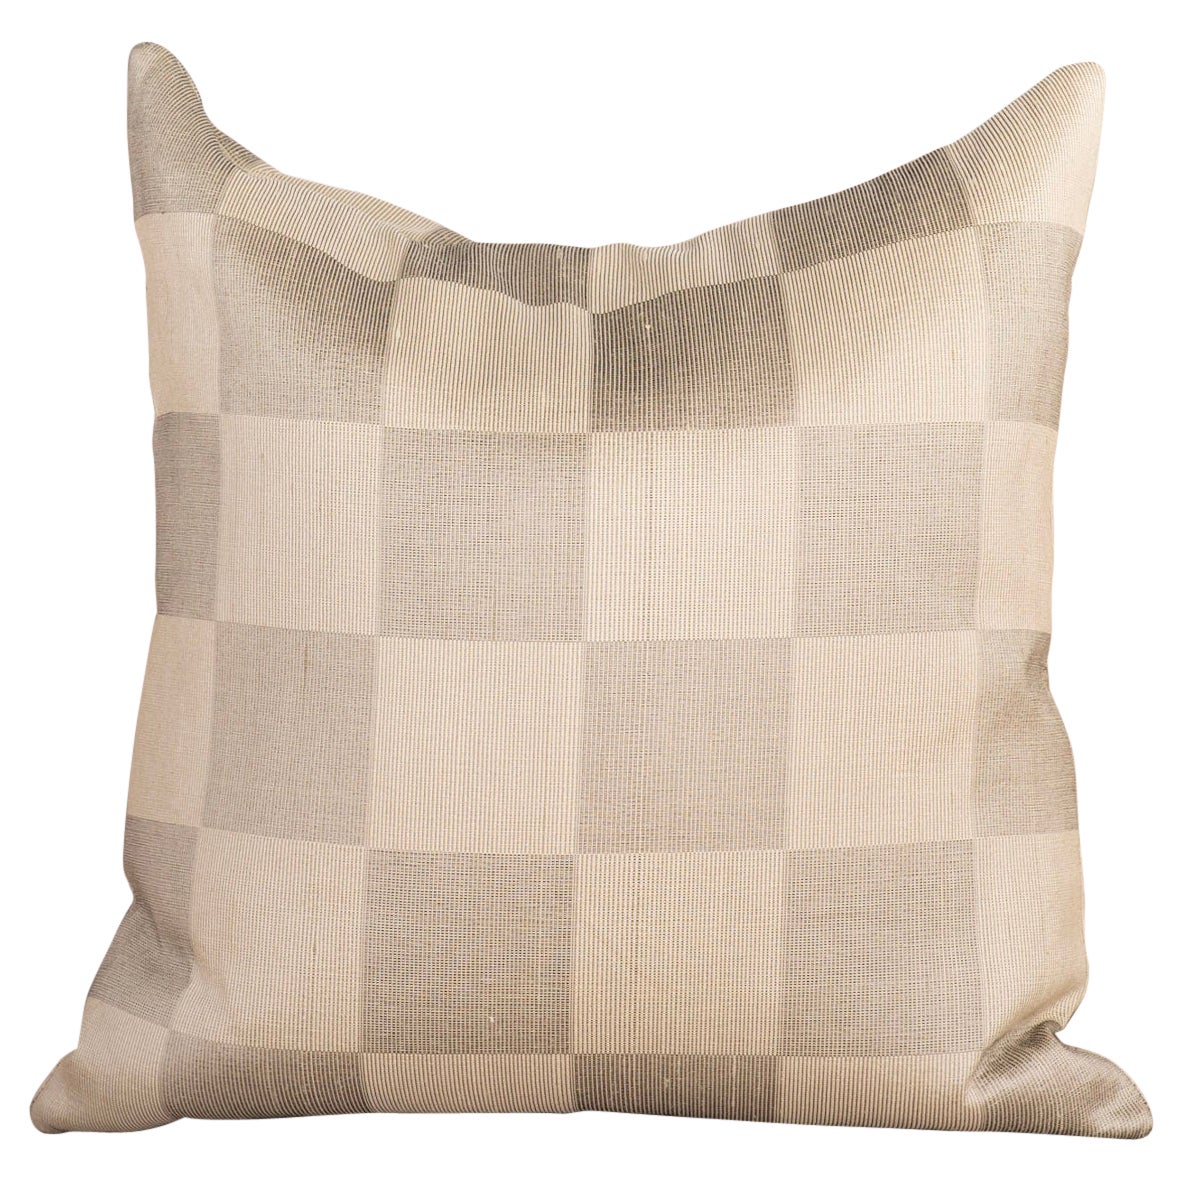 Textured Grey & Ivory Checkered Pillow For Sale